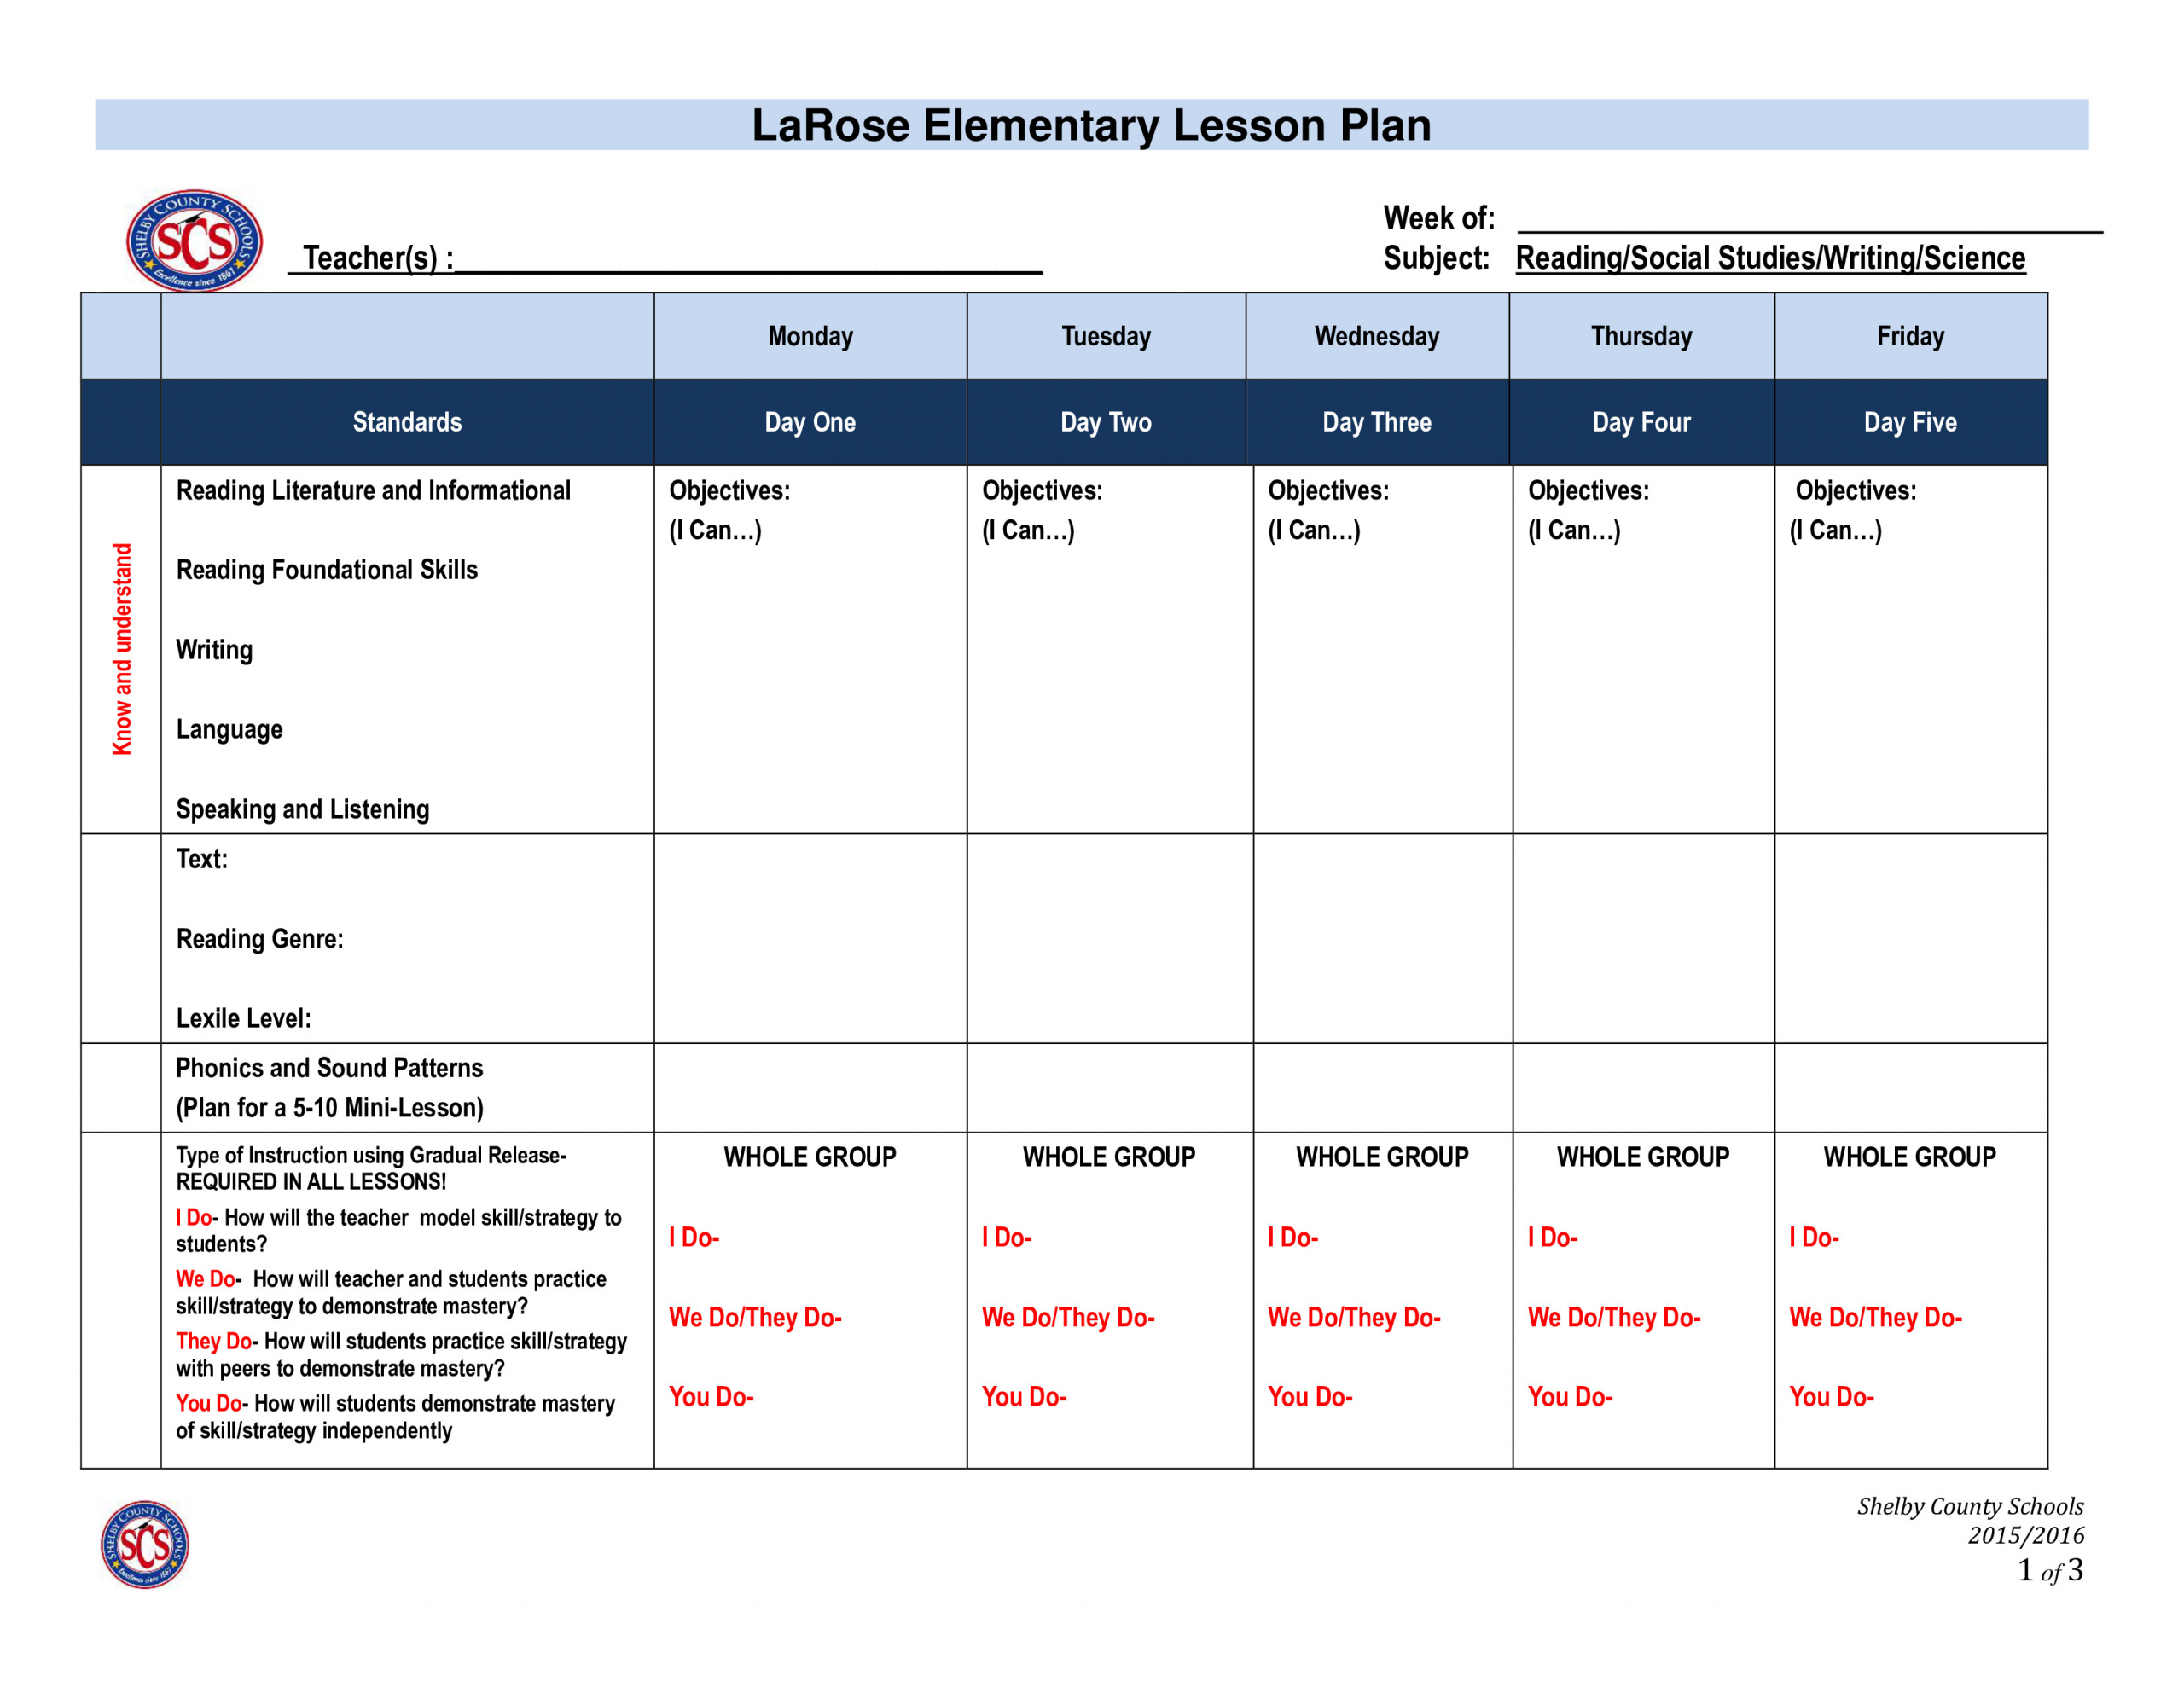 Lesson Plan Example for Elementary Elementary Lesson Plan